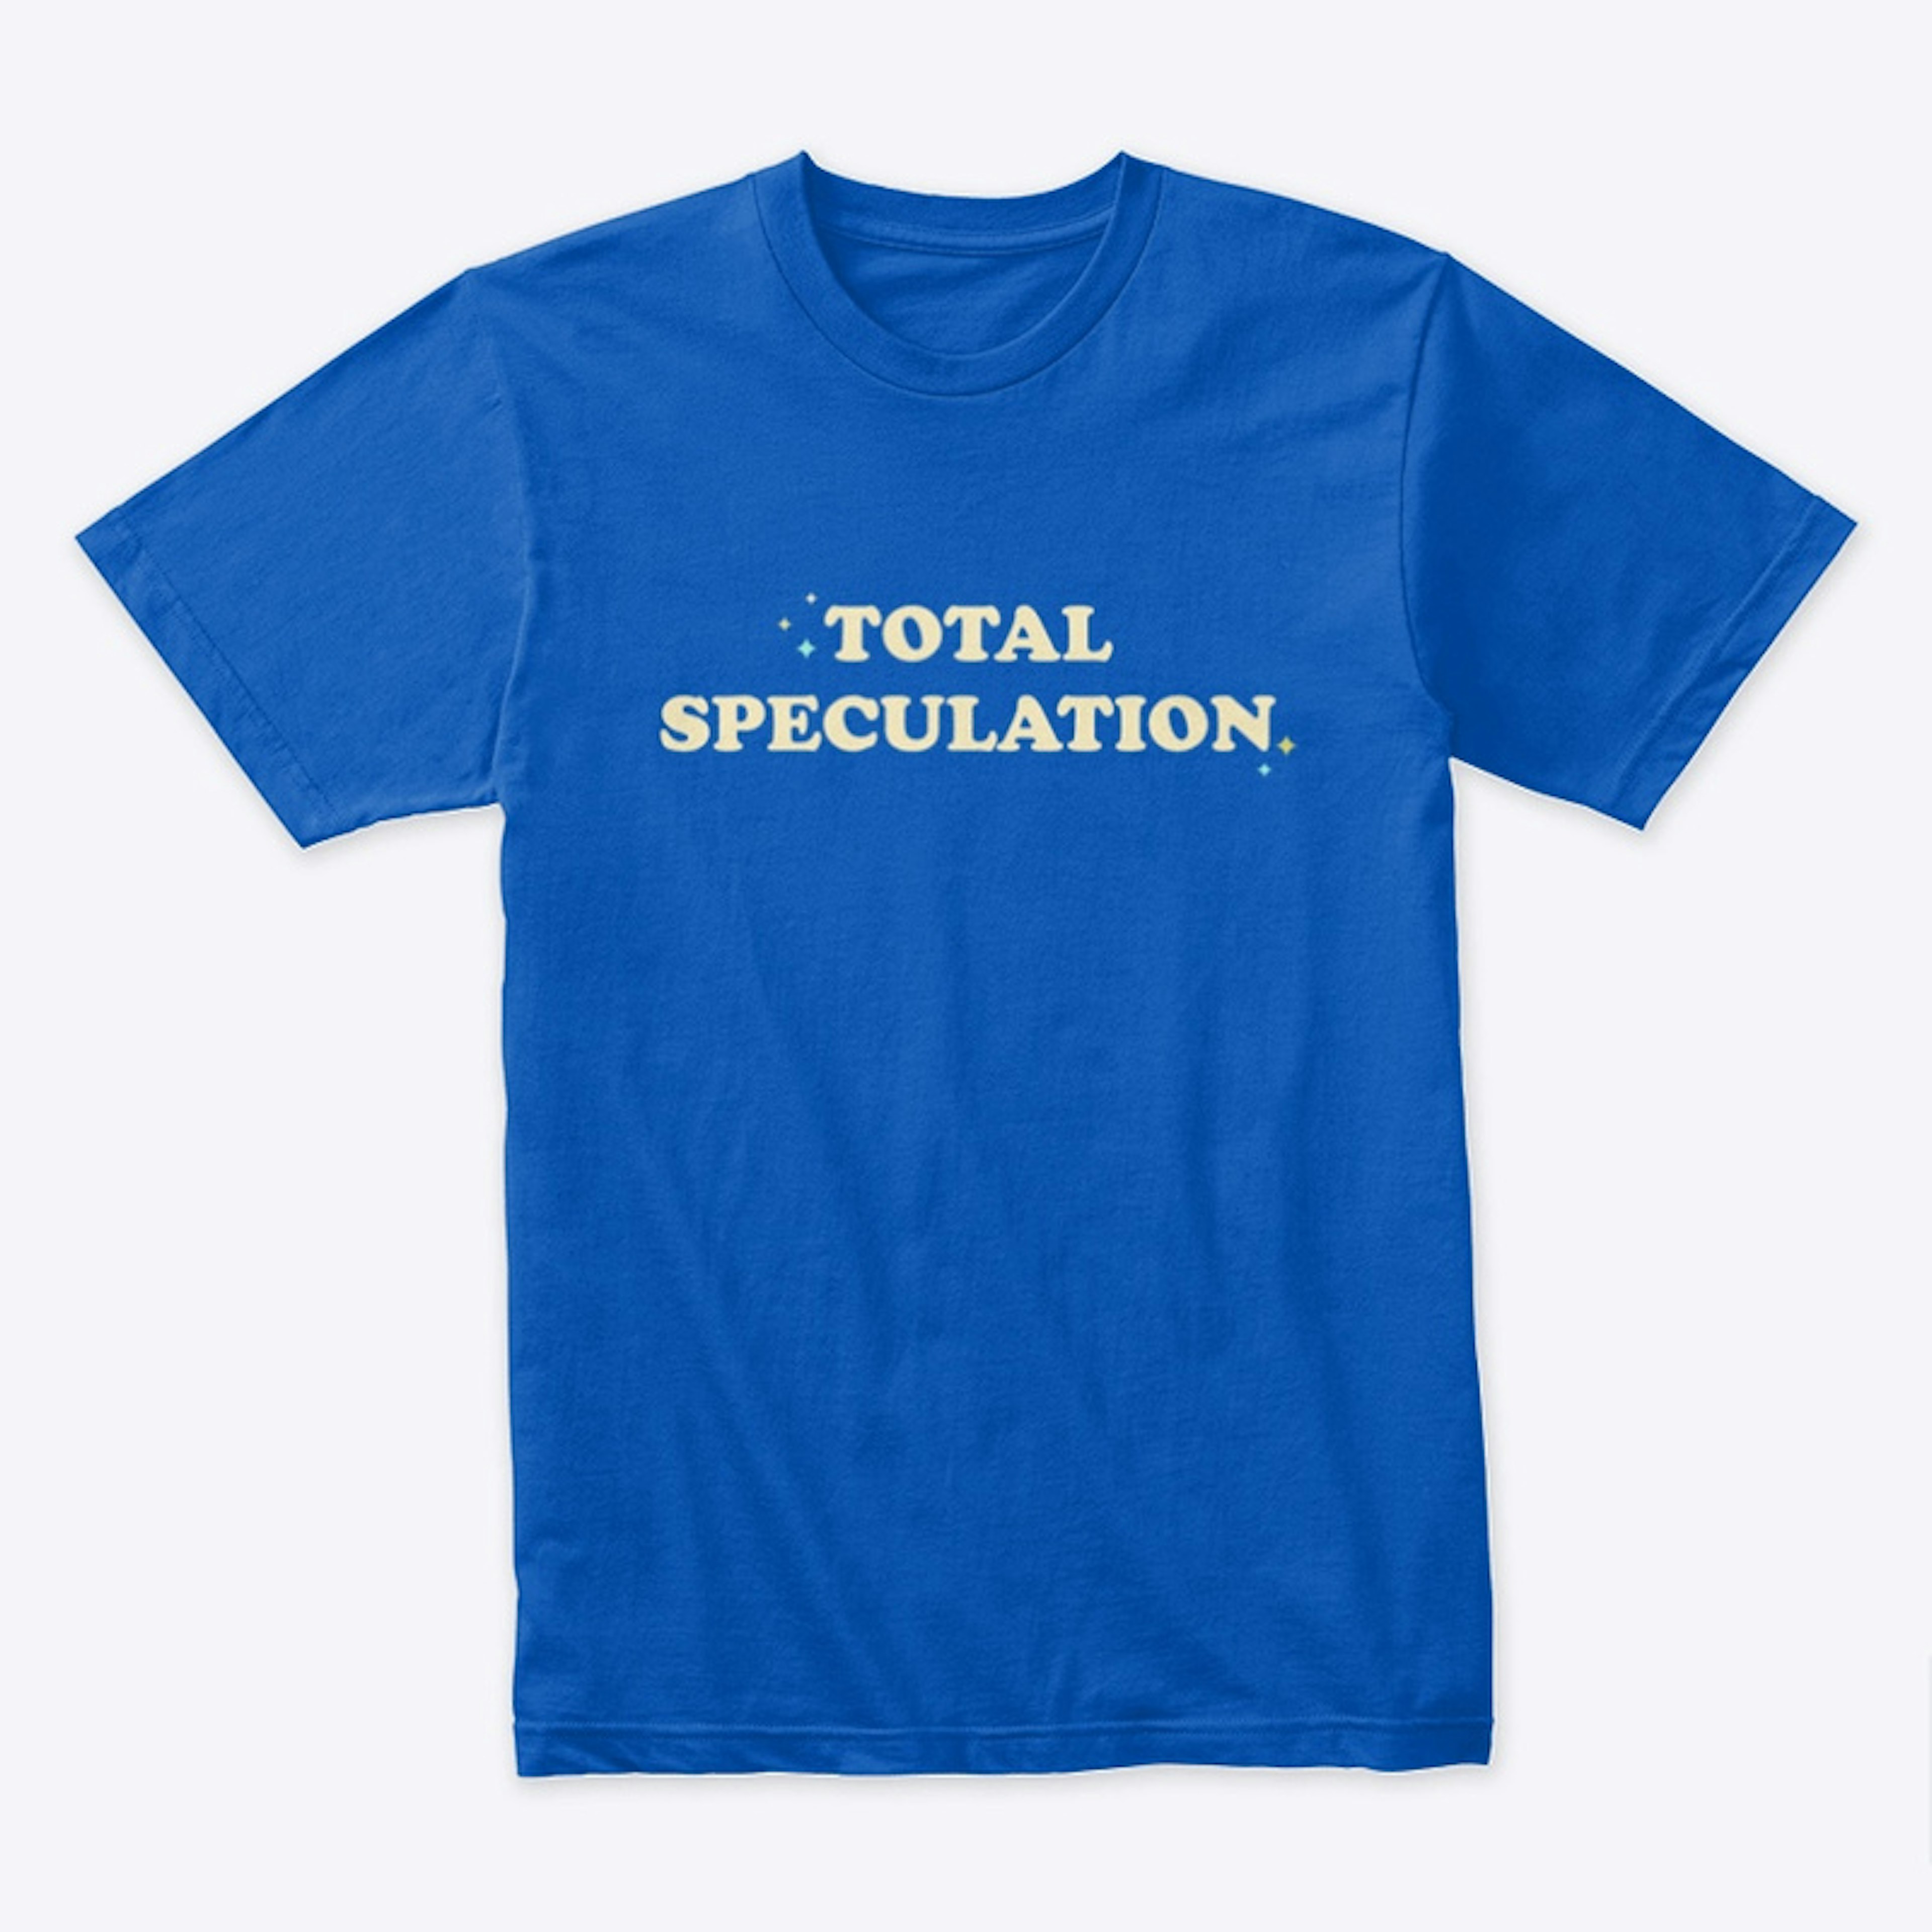 Total Speculation